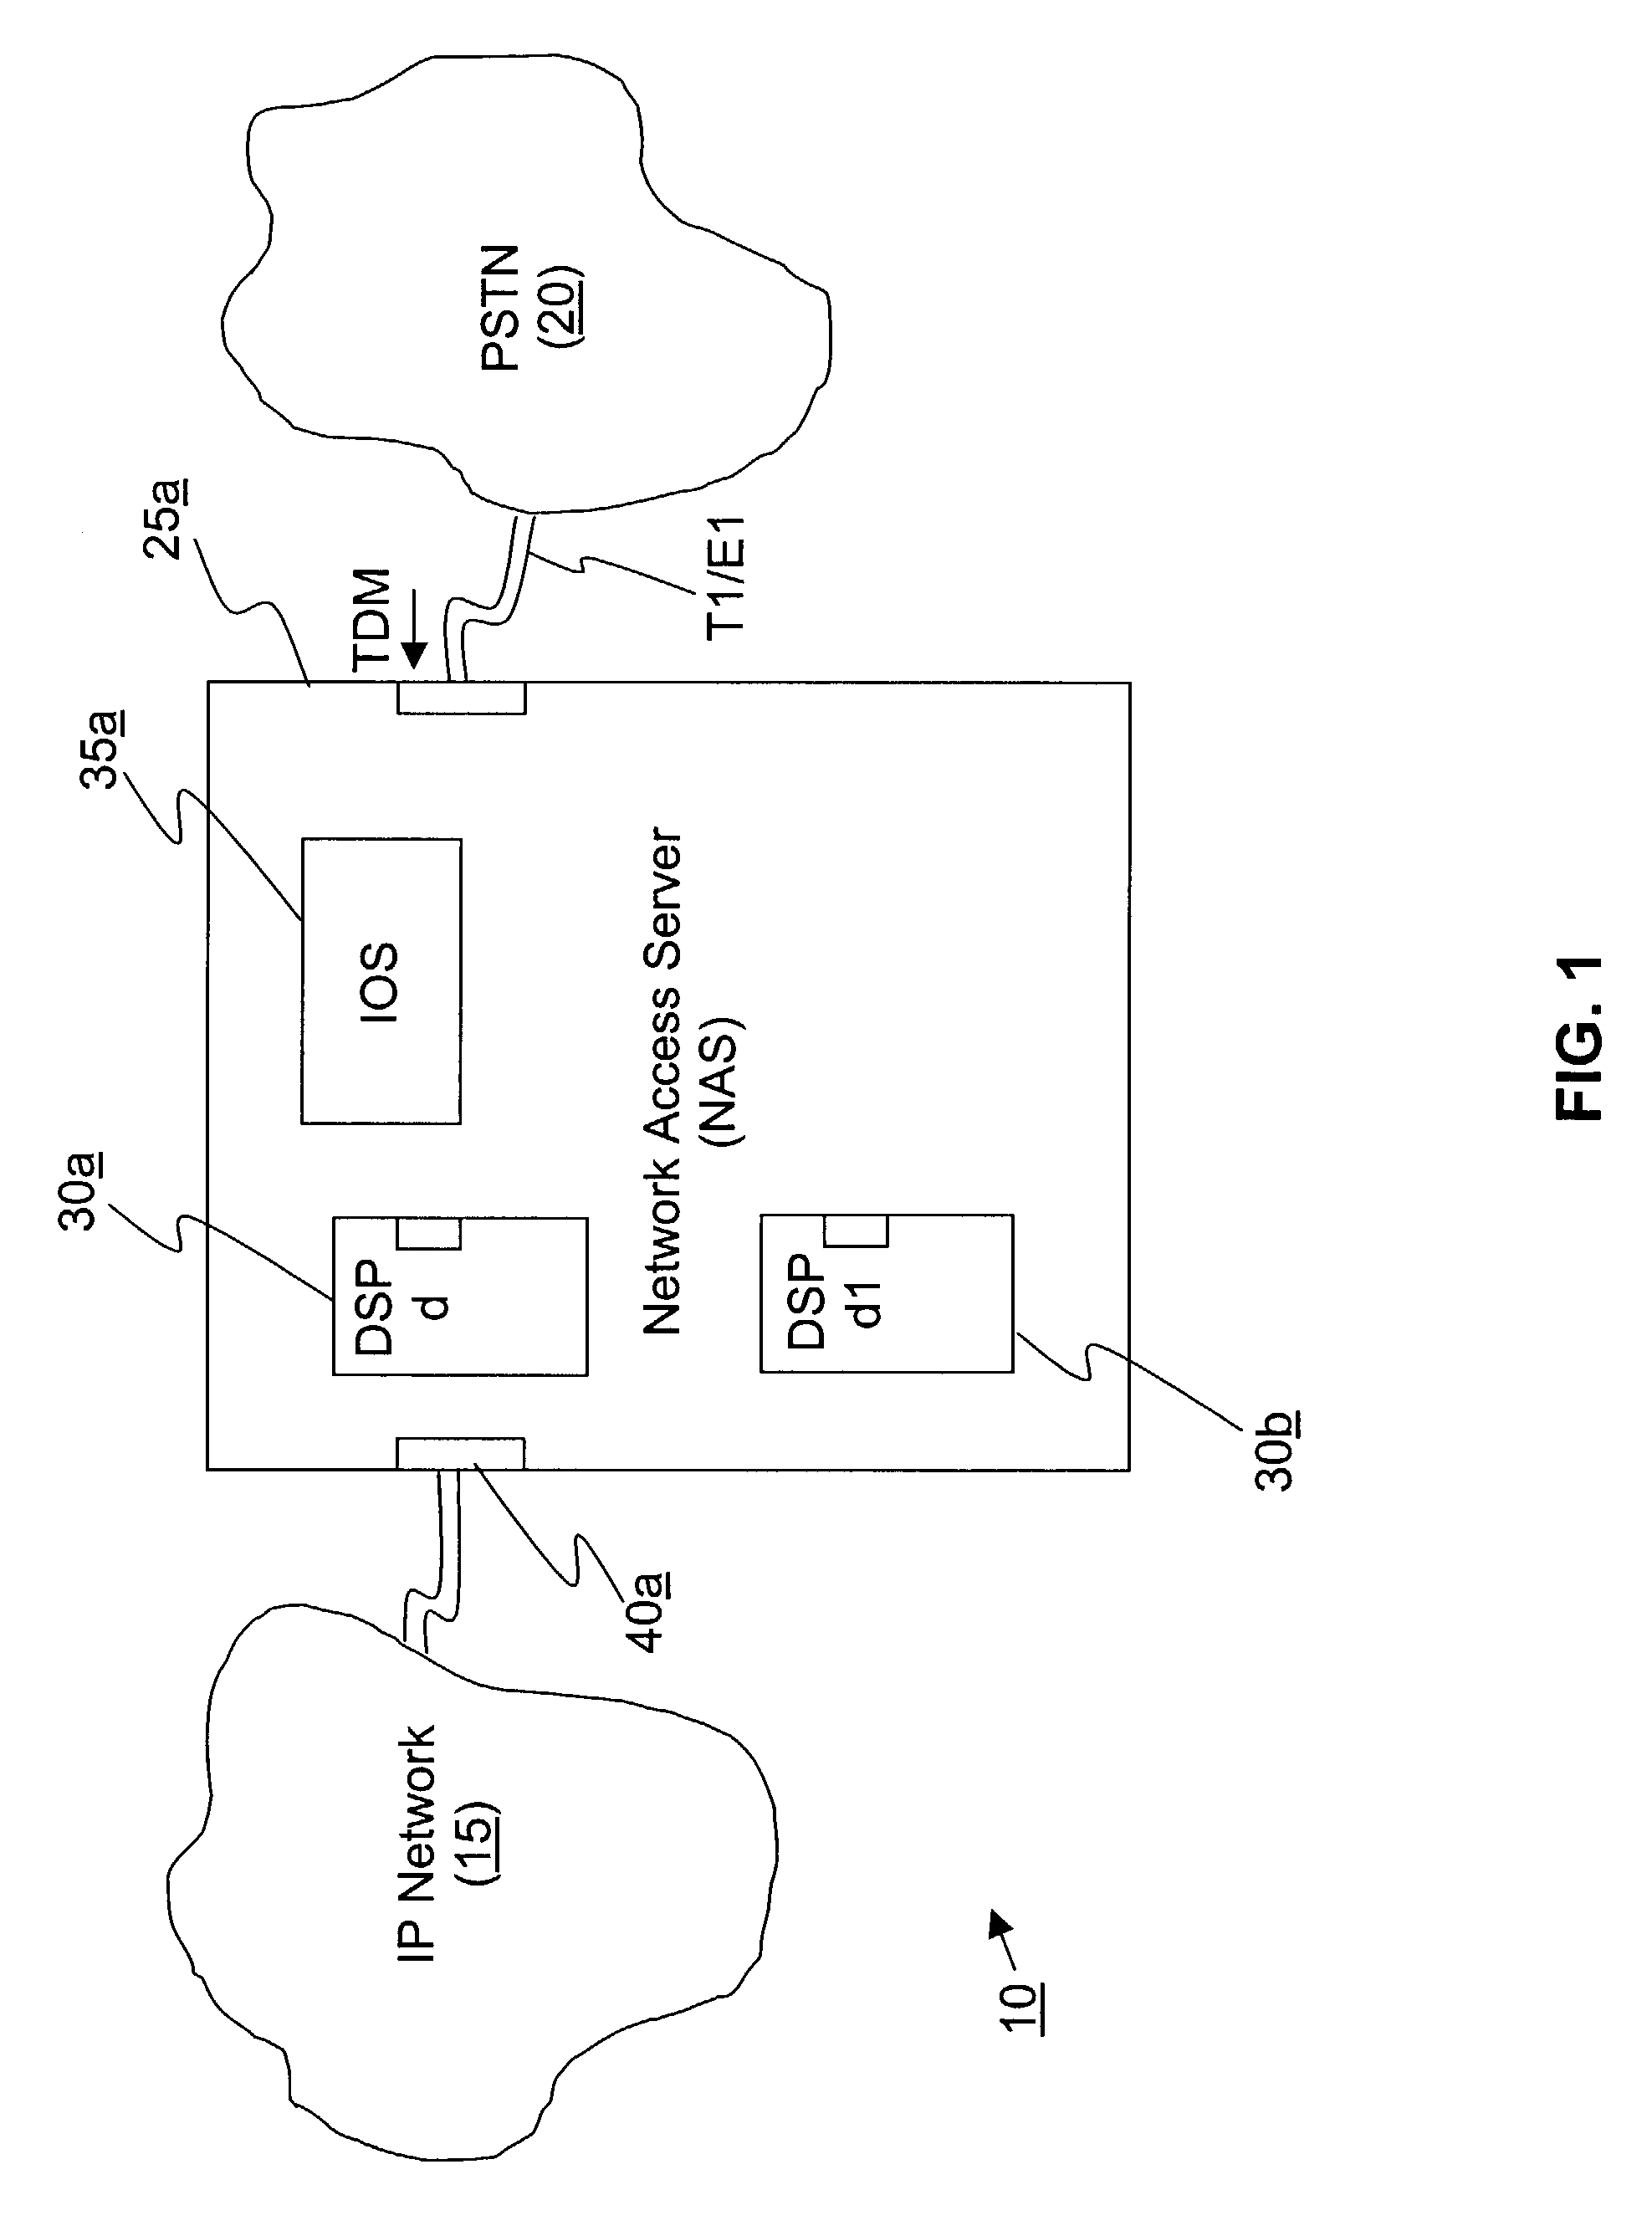 Method of managing signal processing resources